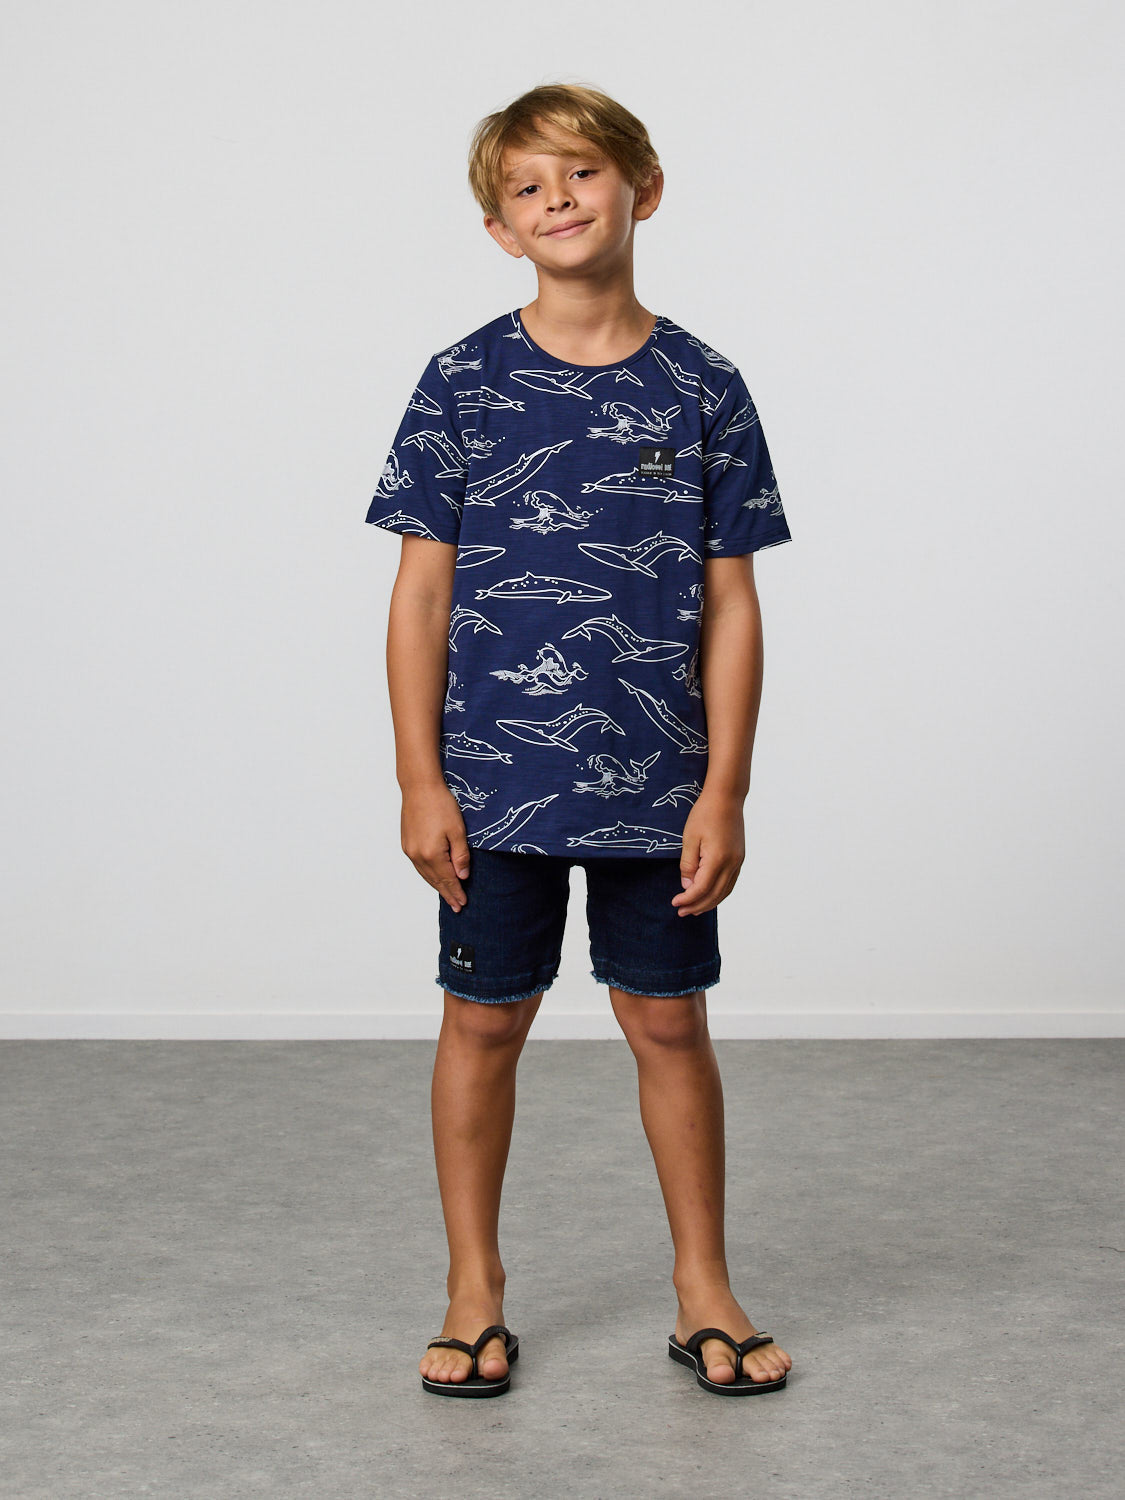 Radicool Kids Brydes's tee: Cotton / spandex tee in navy with Bryde’s whale outline yardage print in white. Part of our ‘Come Together’* series. For those that like something a little more pared back.    Fit is true to size.